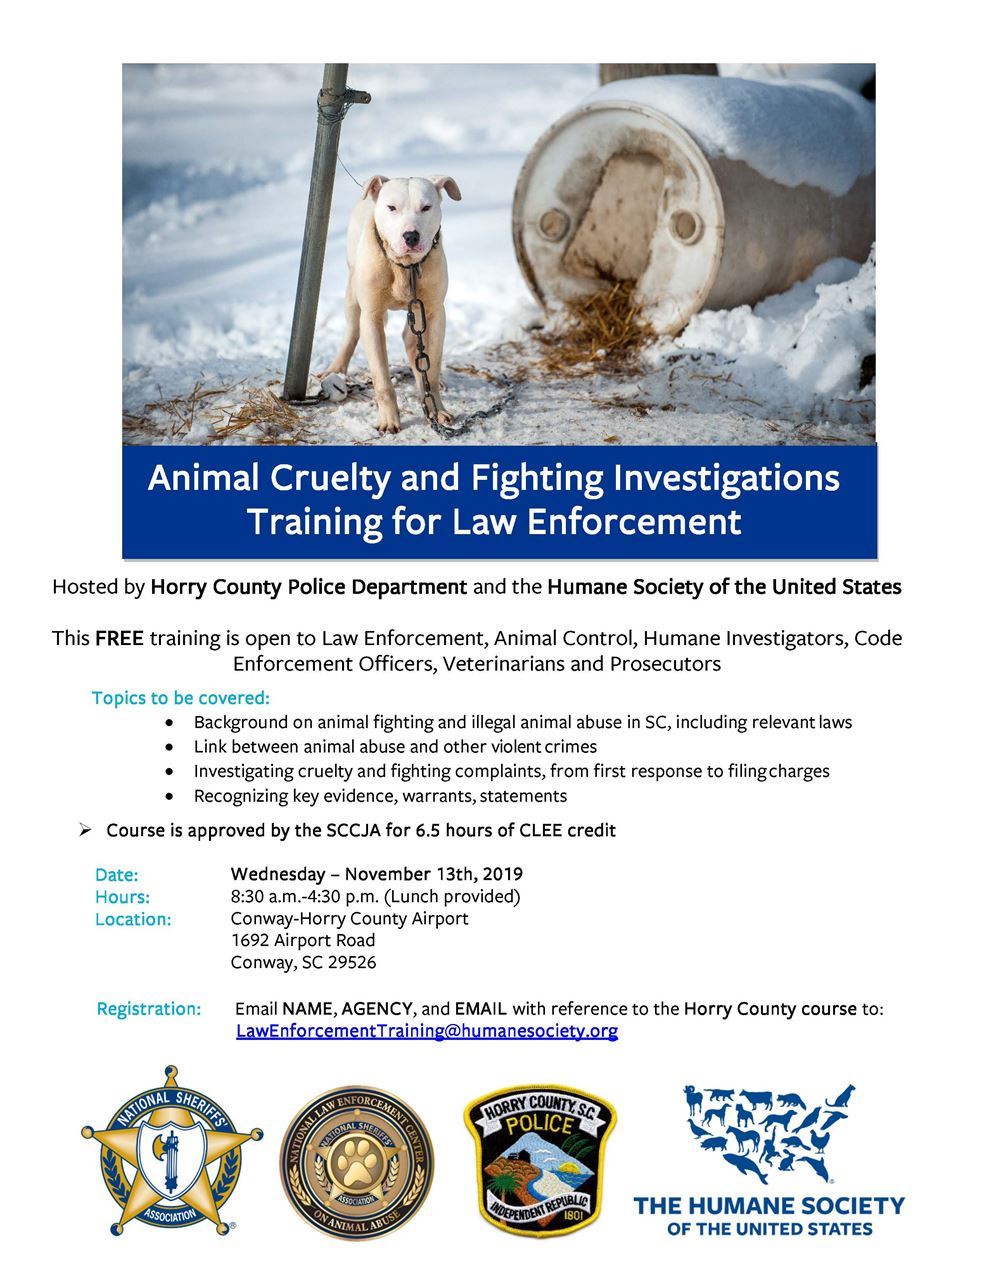 South Carolina Animal Care & Control Association - Animal Cruelty and  Fighting Investigations for Law Enforcement